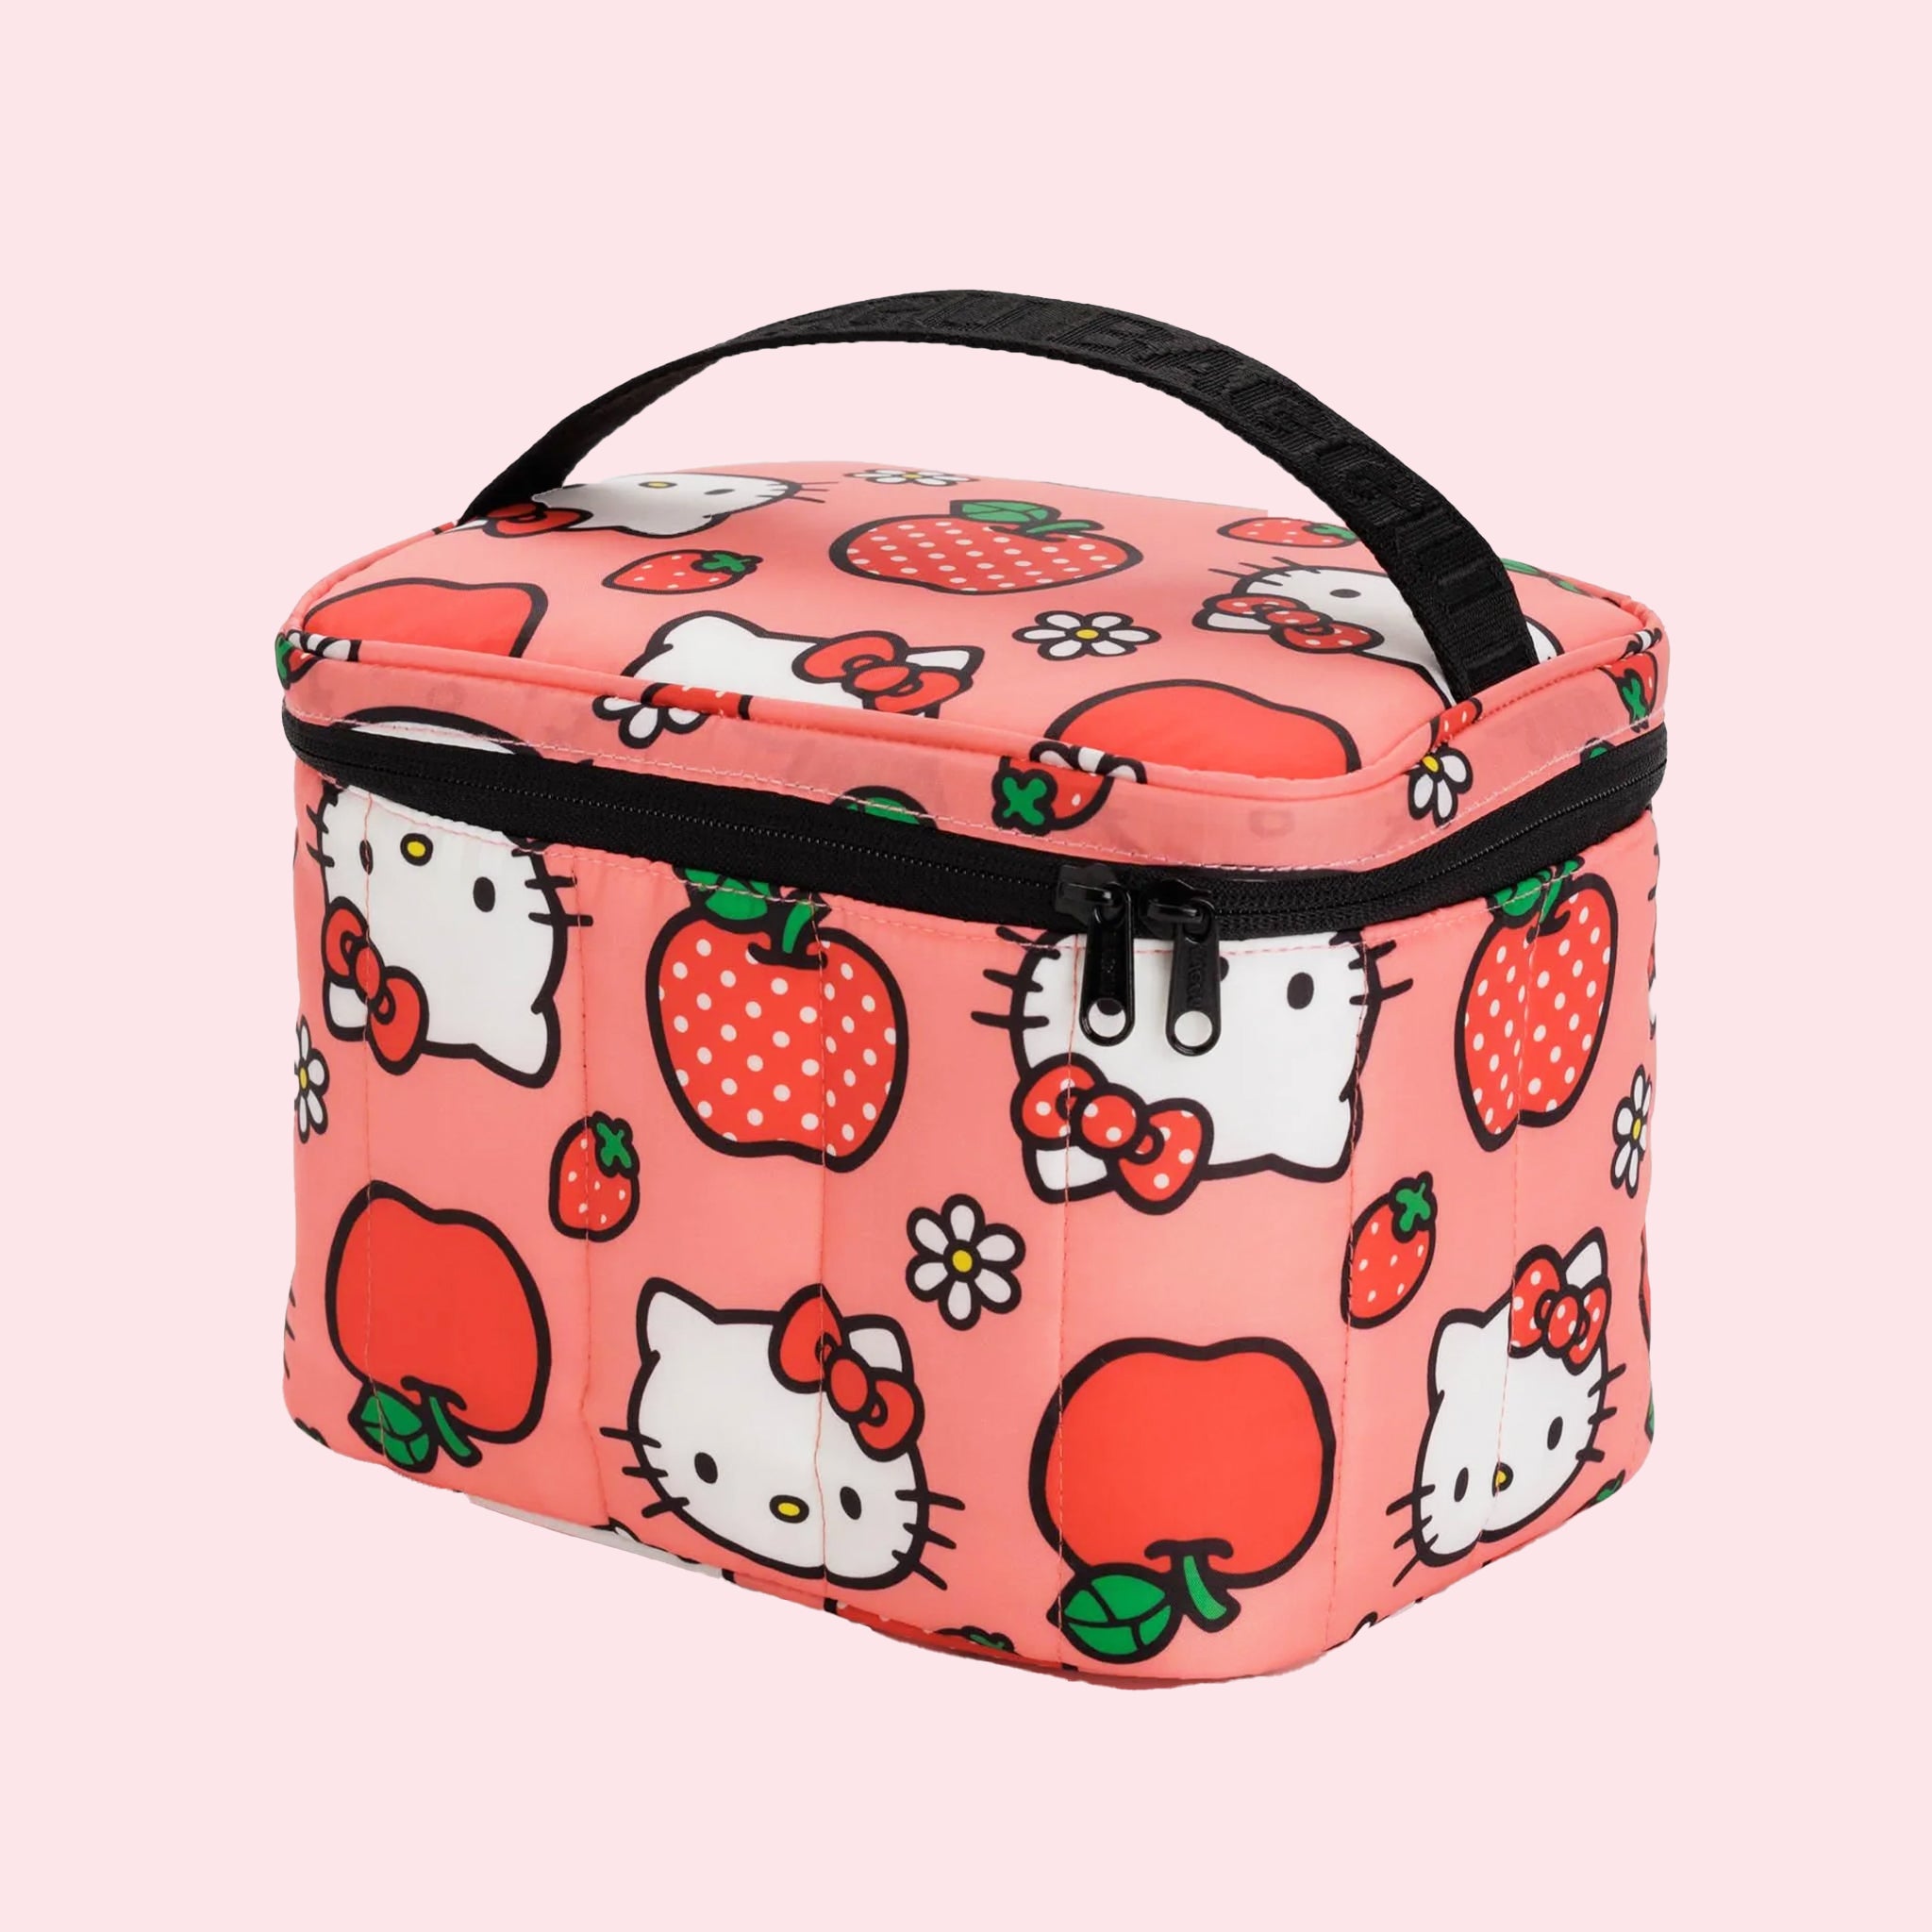 A pink and red Hellot Kitty patterned lunch box with a black handle and zipper. 